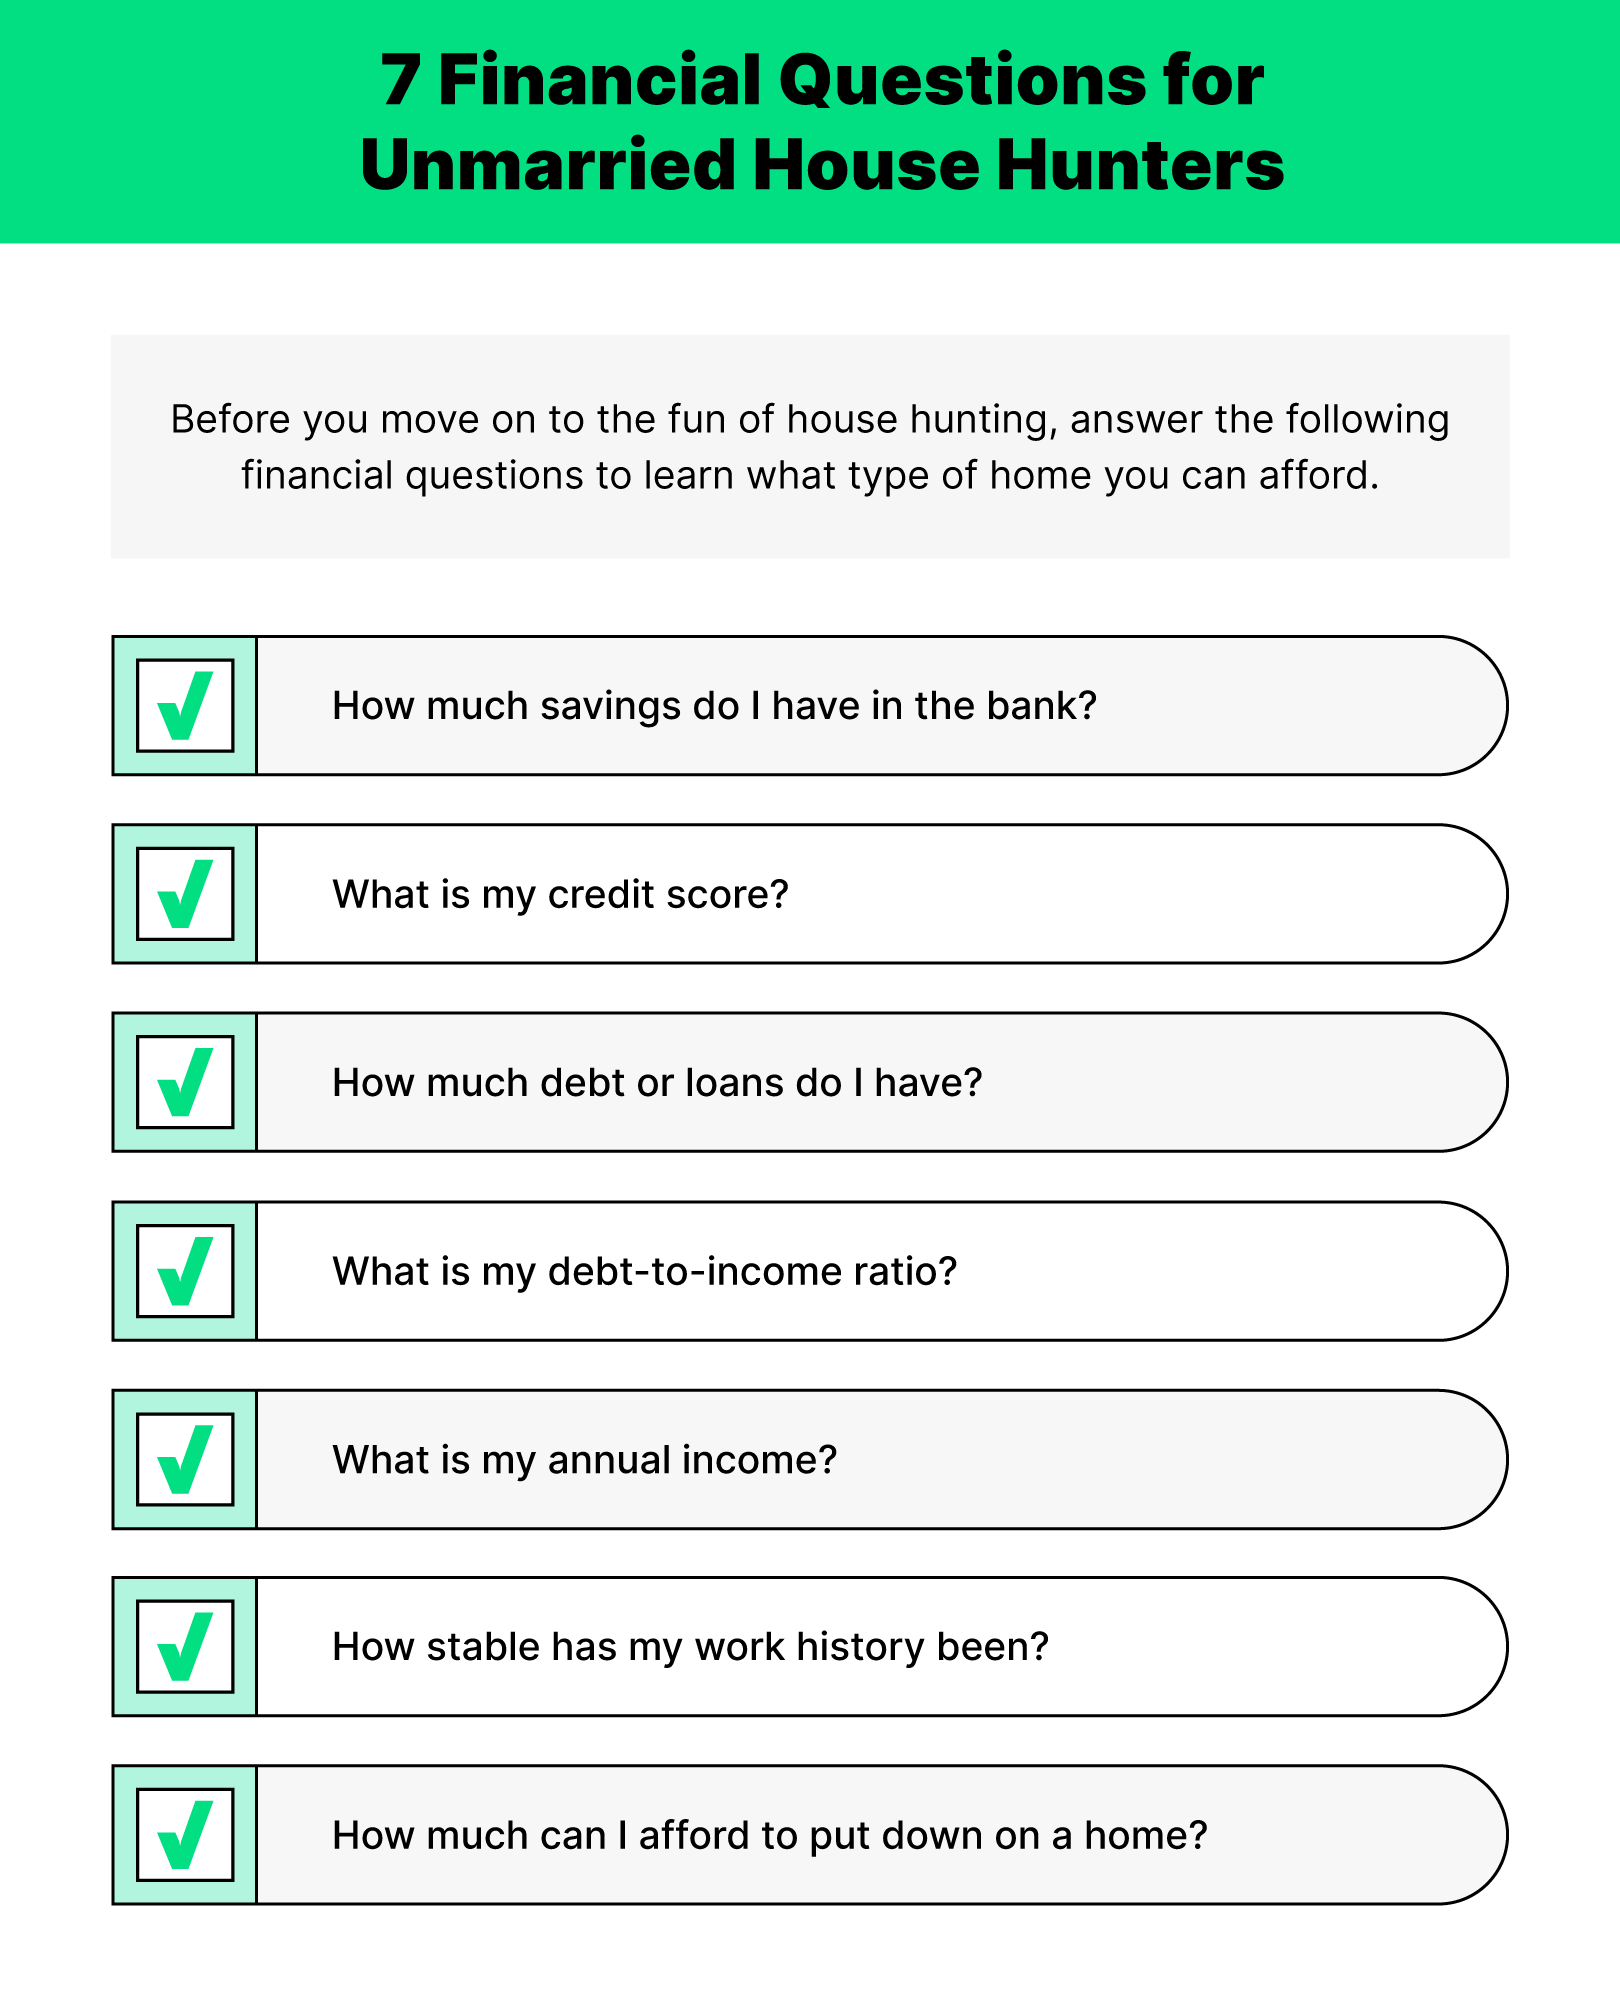 Checklist of financial questions for unmarried homebuyers